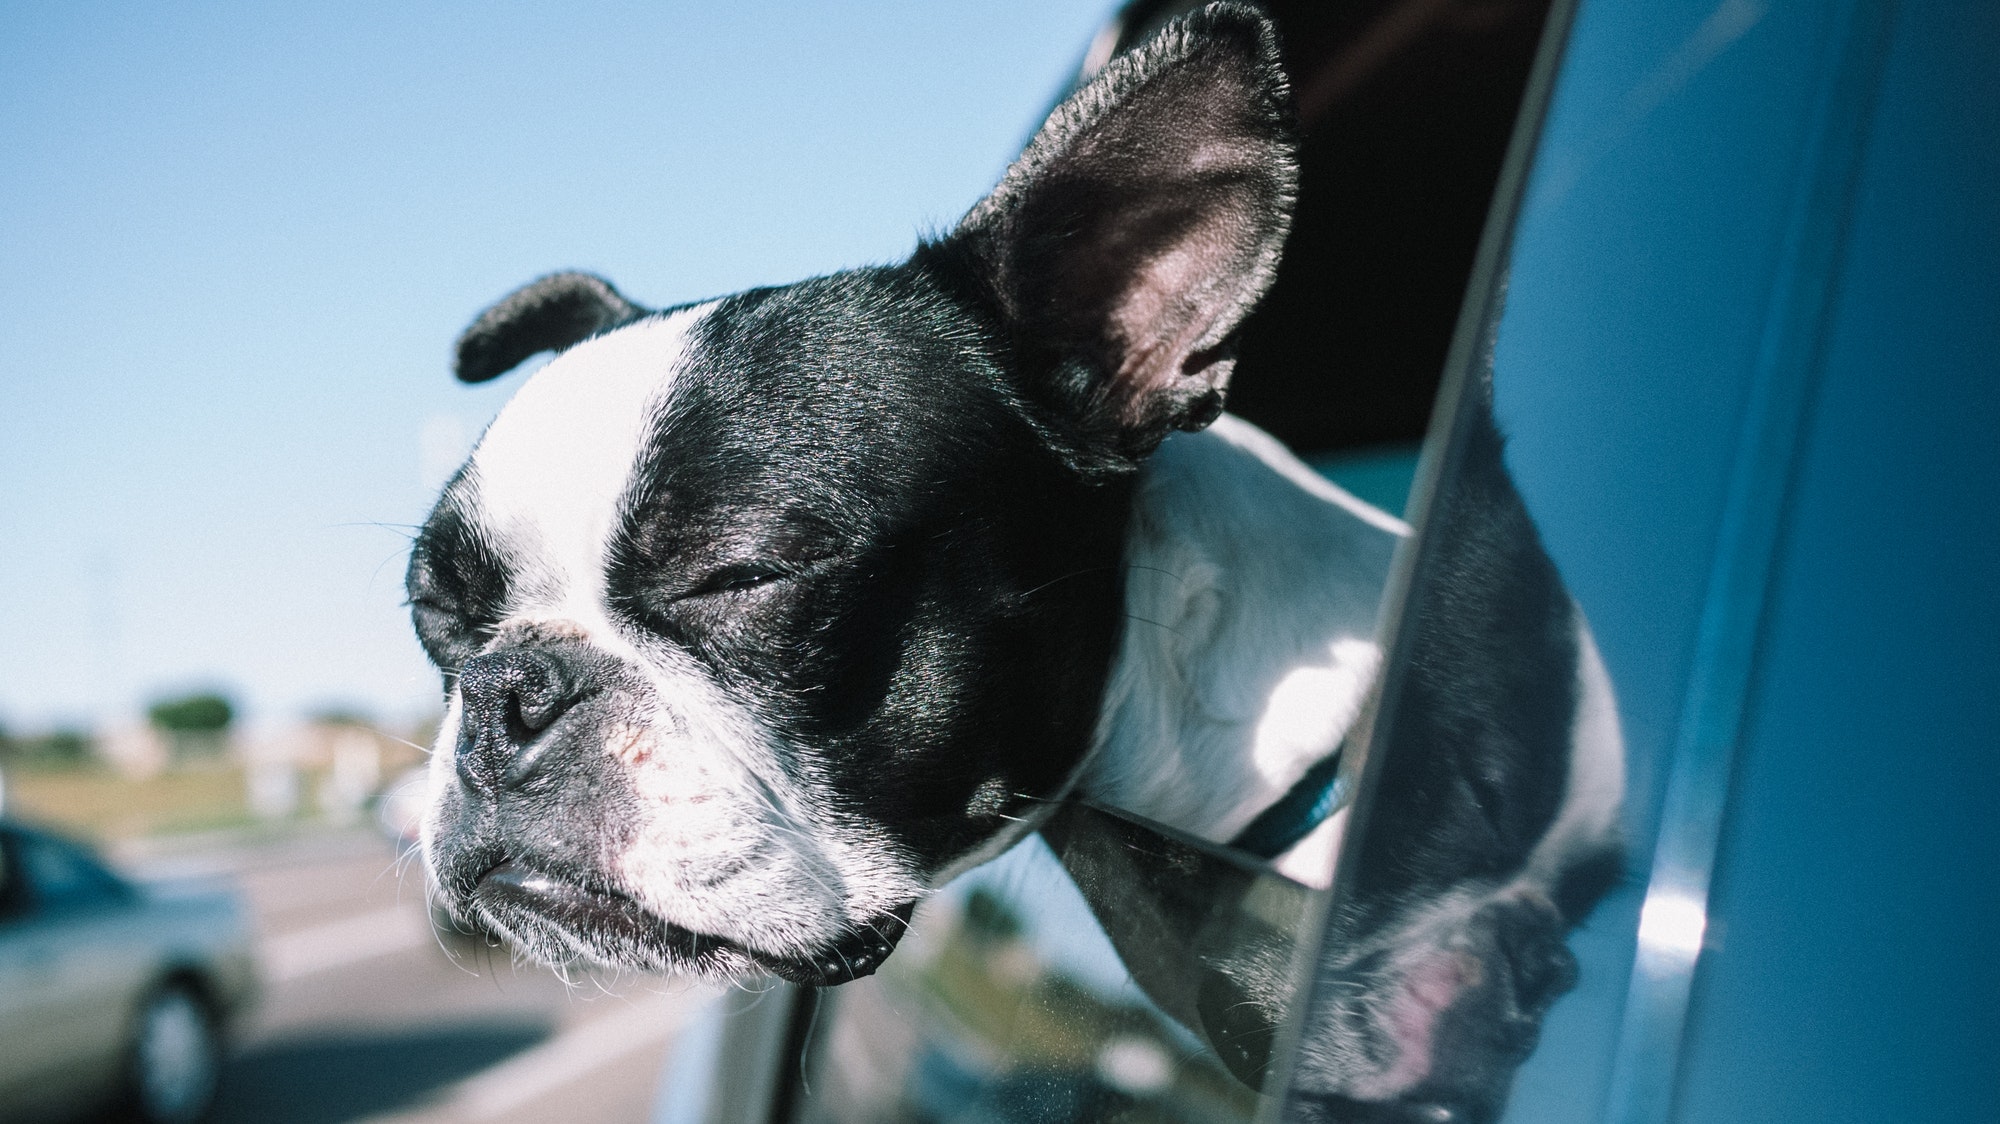 A dog enjoying the wind hitting his face outside a car window.